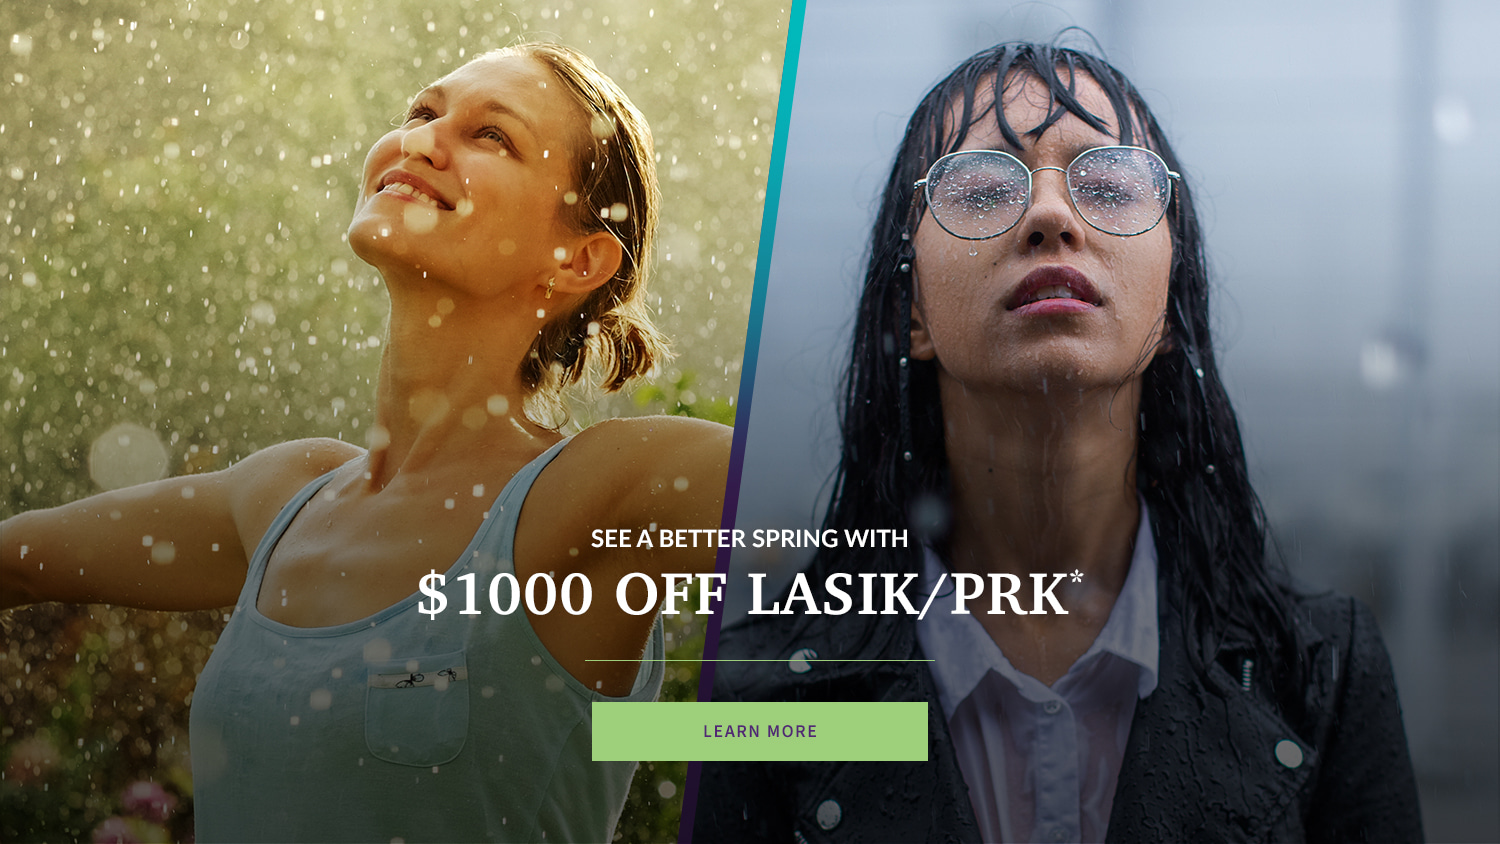 SEE A BETTER SPRING WITH $1000 OFF LASIK/PRK*